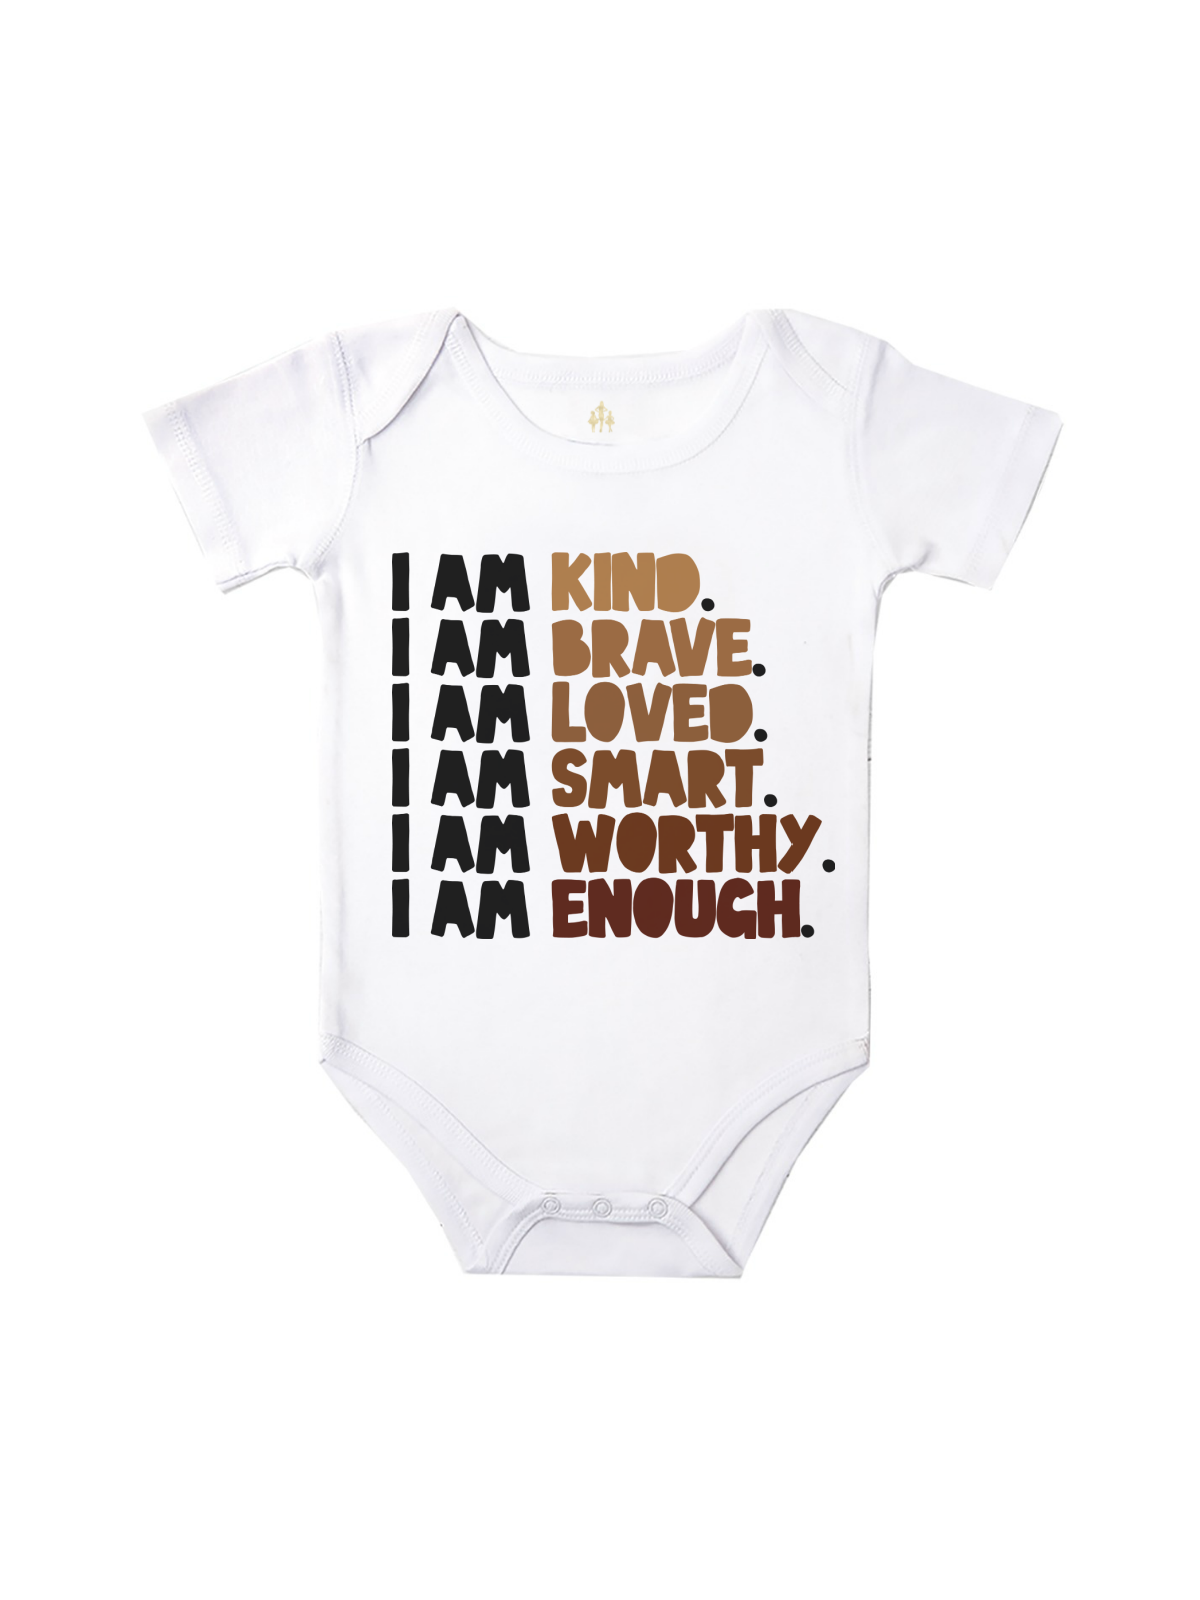 Baby Positive Affirmations Bodysuit in White